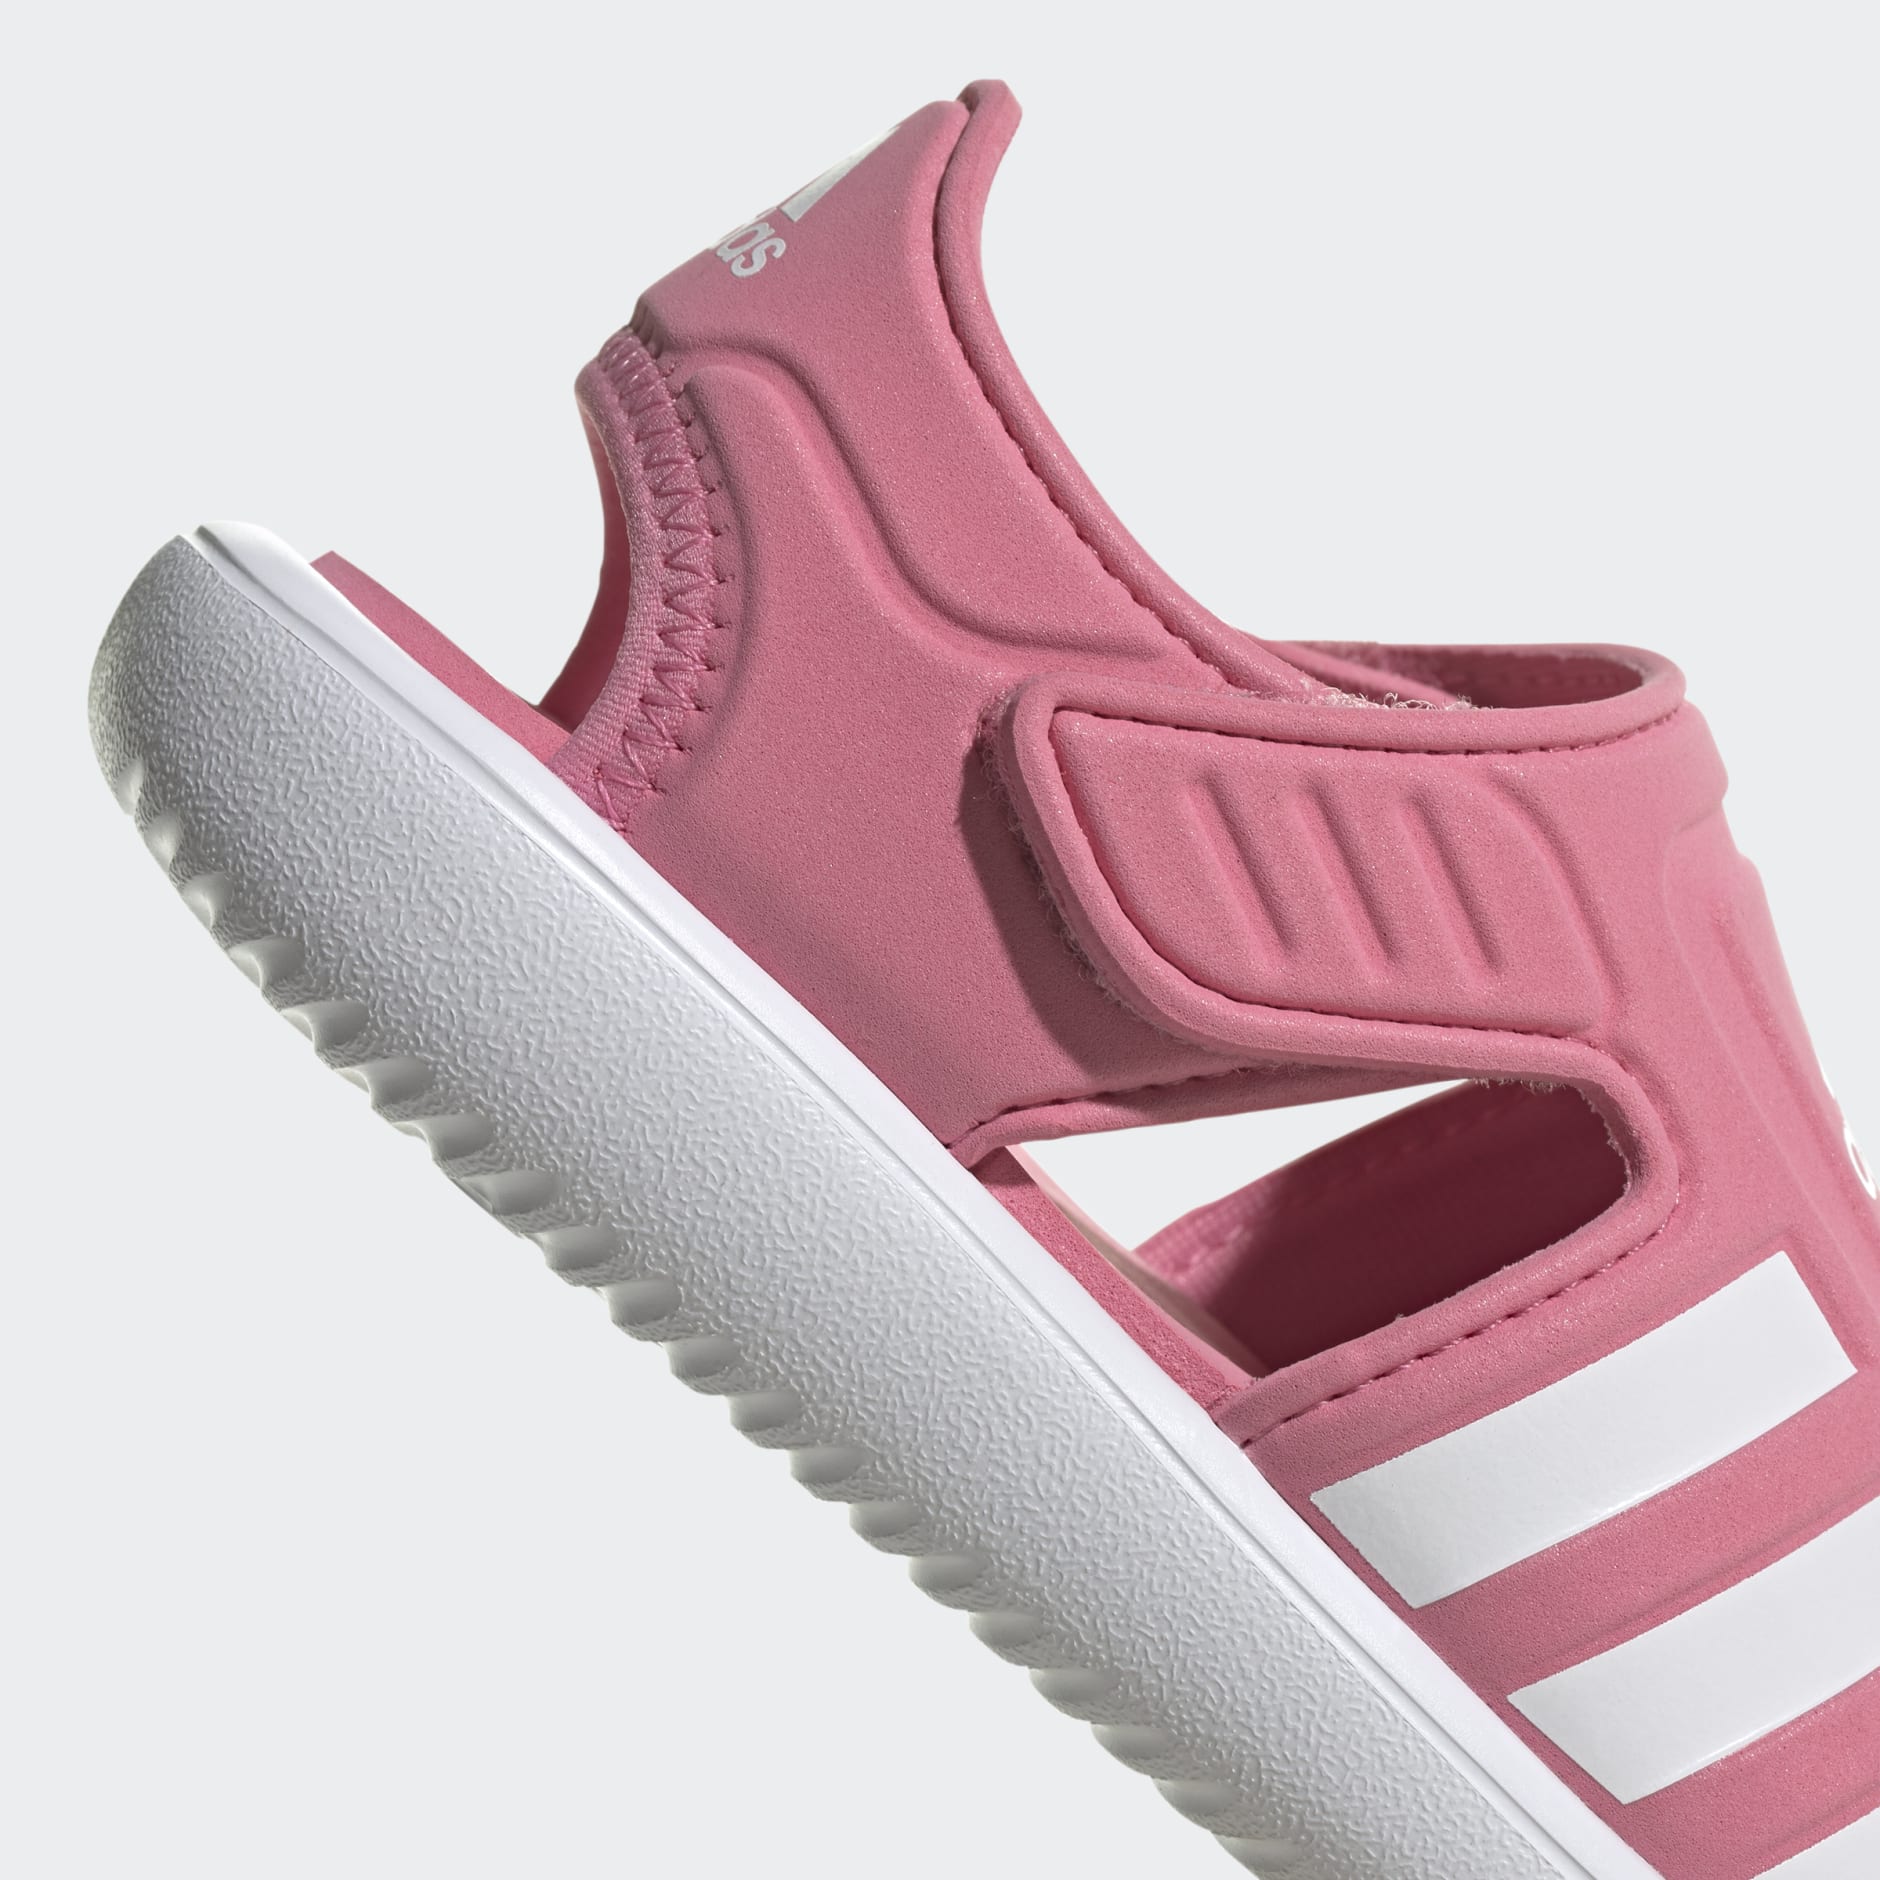 Shoes - Summer Closed Toe Water Sandals - Pink | adidas Israel